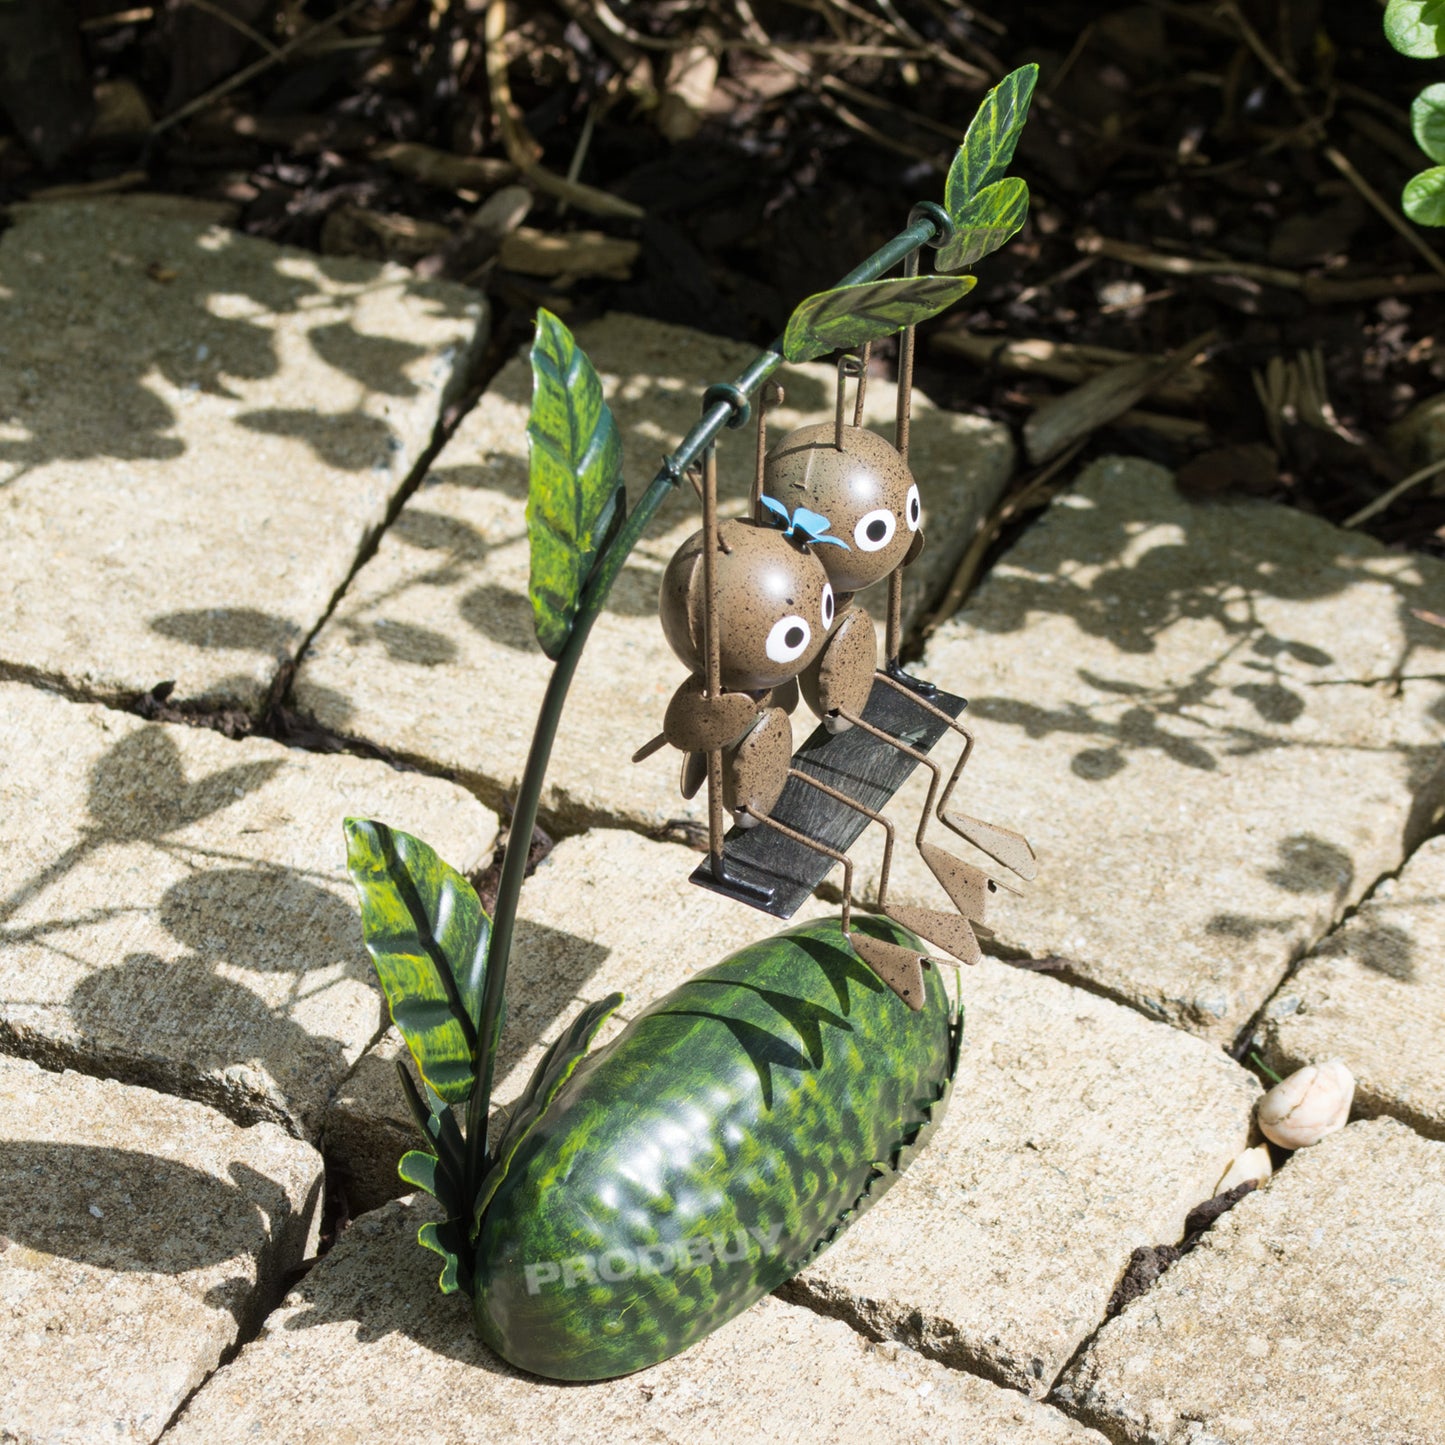 Ants on Leaf Swing Small Metal Garden Ornament Decoration